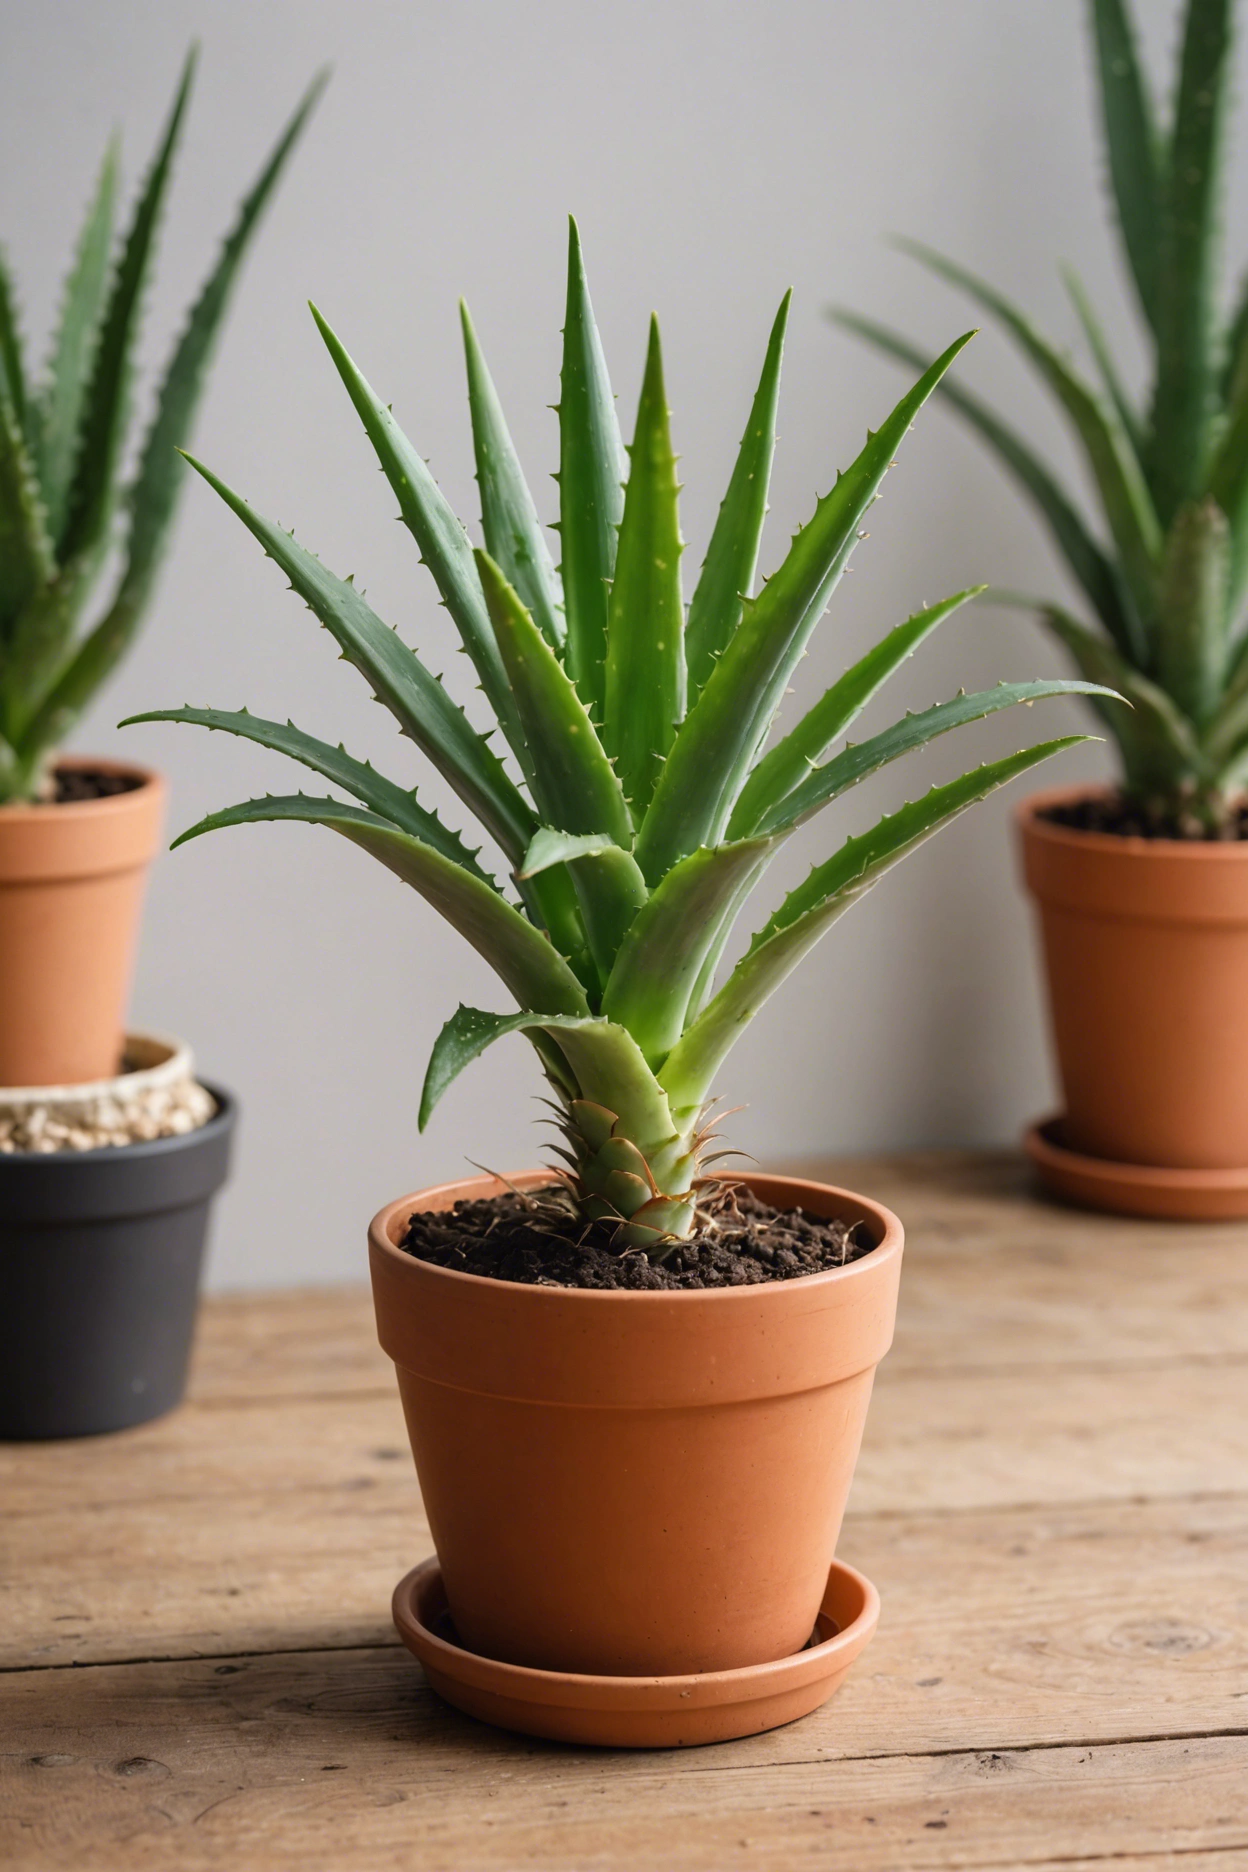 "Stressed aloe vera plant with drooping, yellowing leaves on a wooden surface, soil moisture meter indicating overwatering."